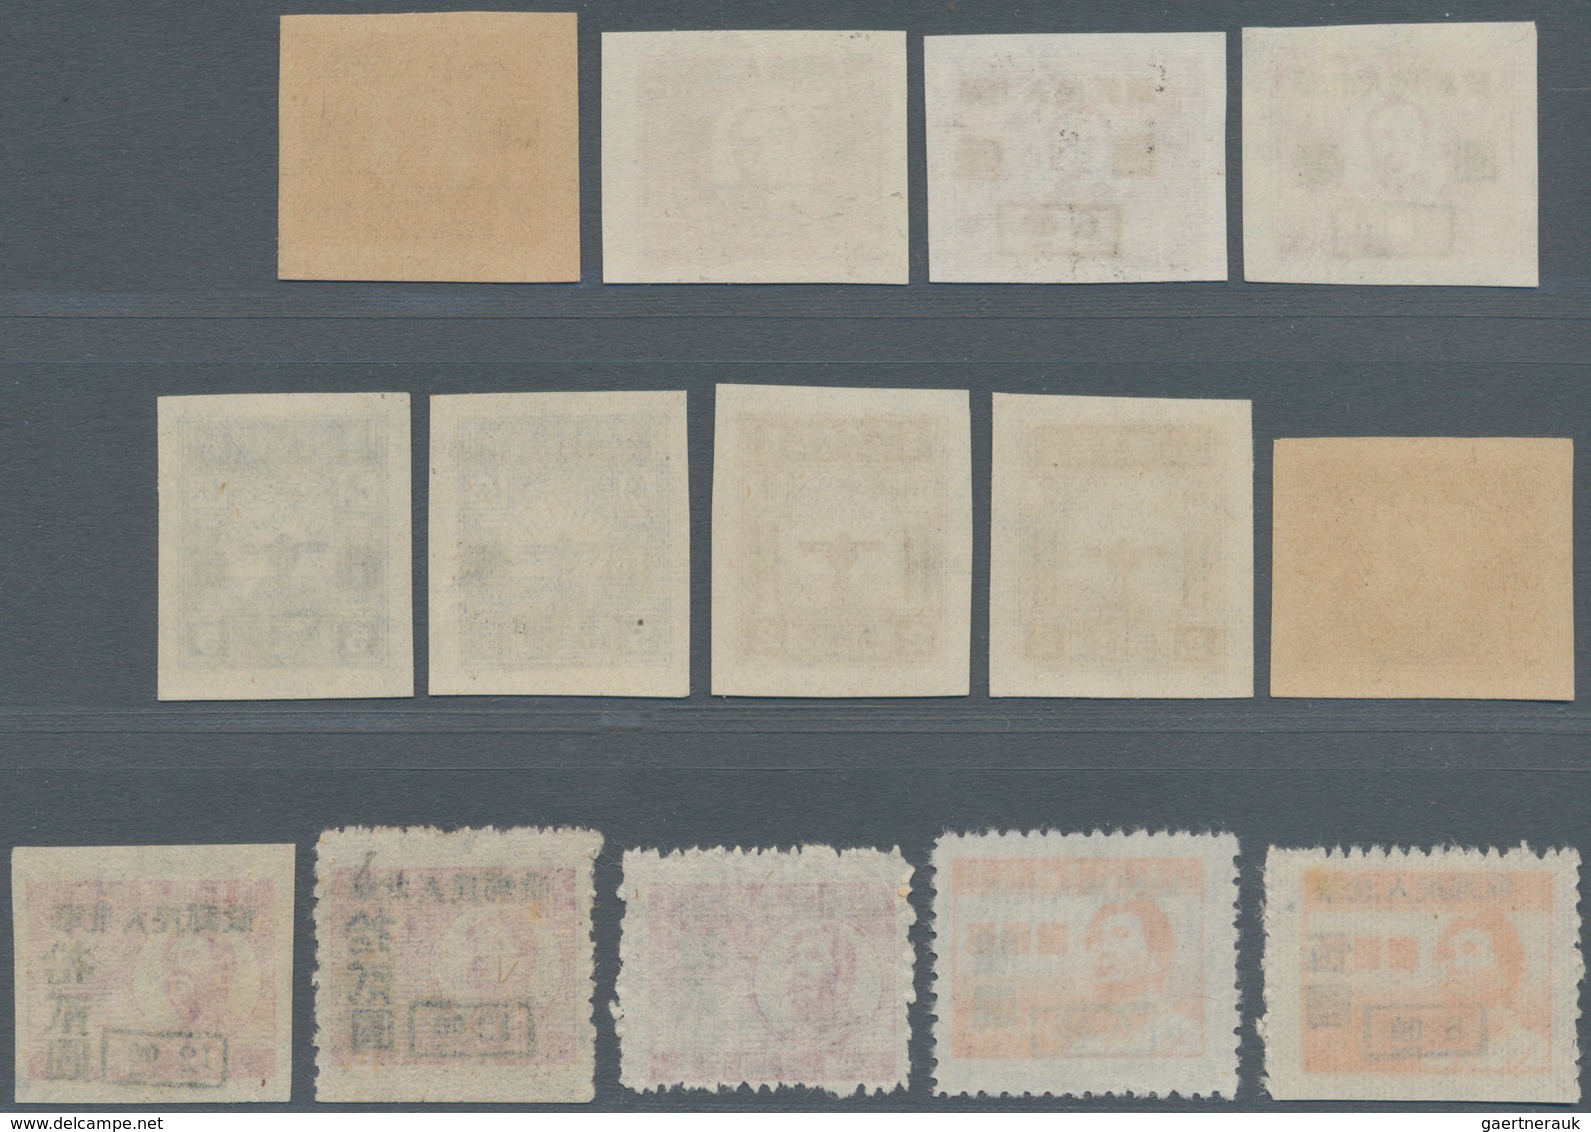 China - Volksrepublik - Provinzen: North China, 1949, "North China People's Post", Ovpt. $1/$60 - $1 - Other & Unclassified